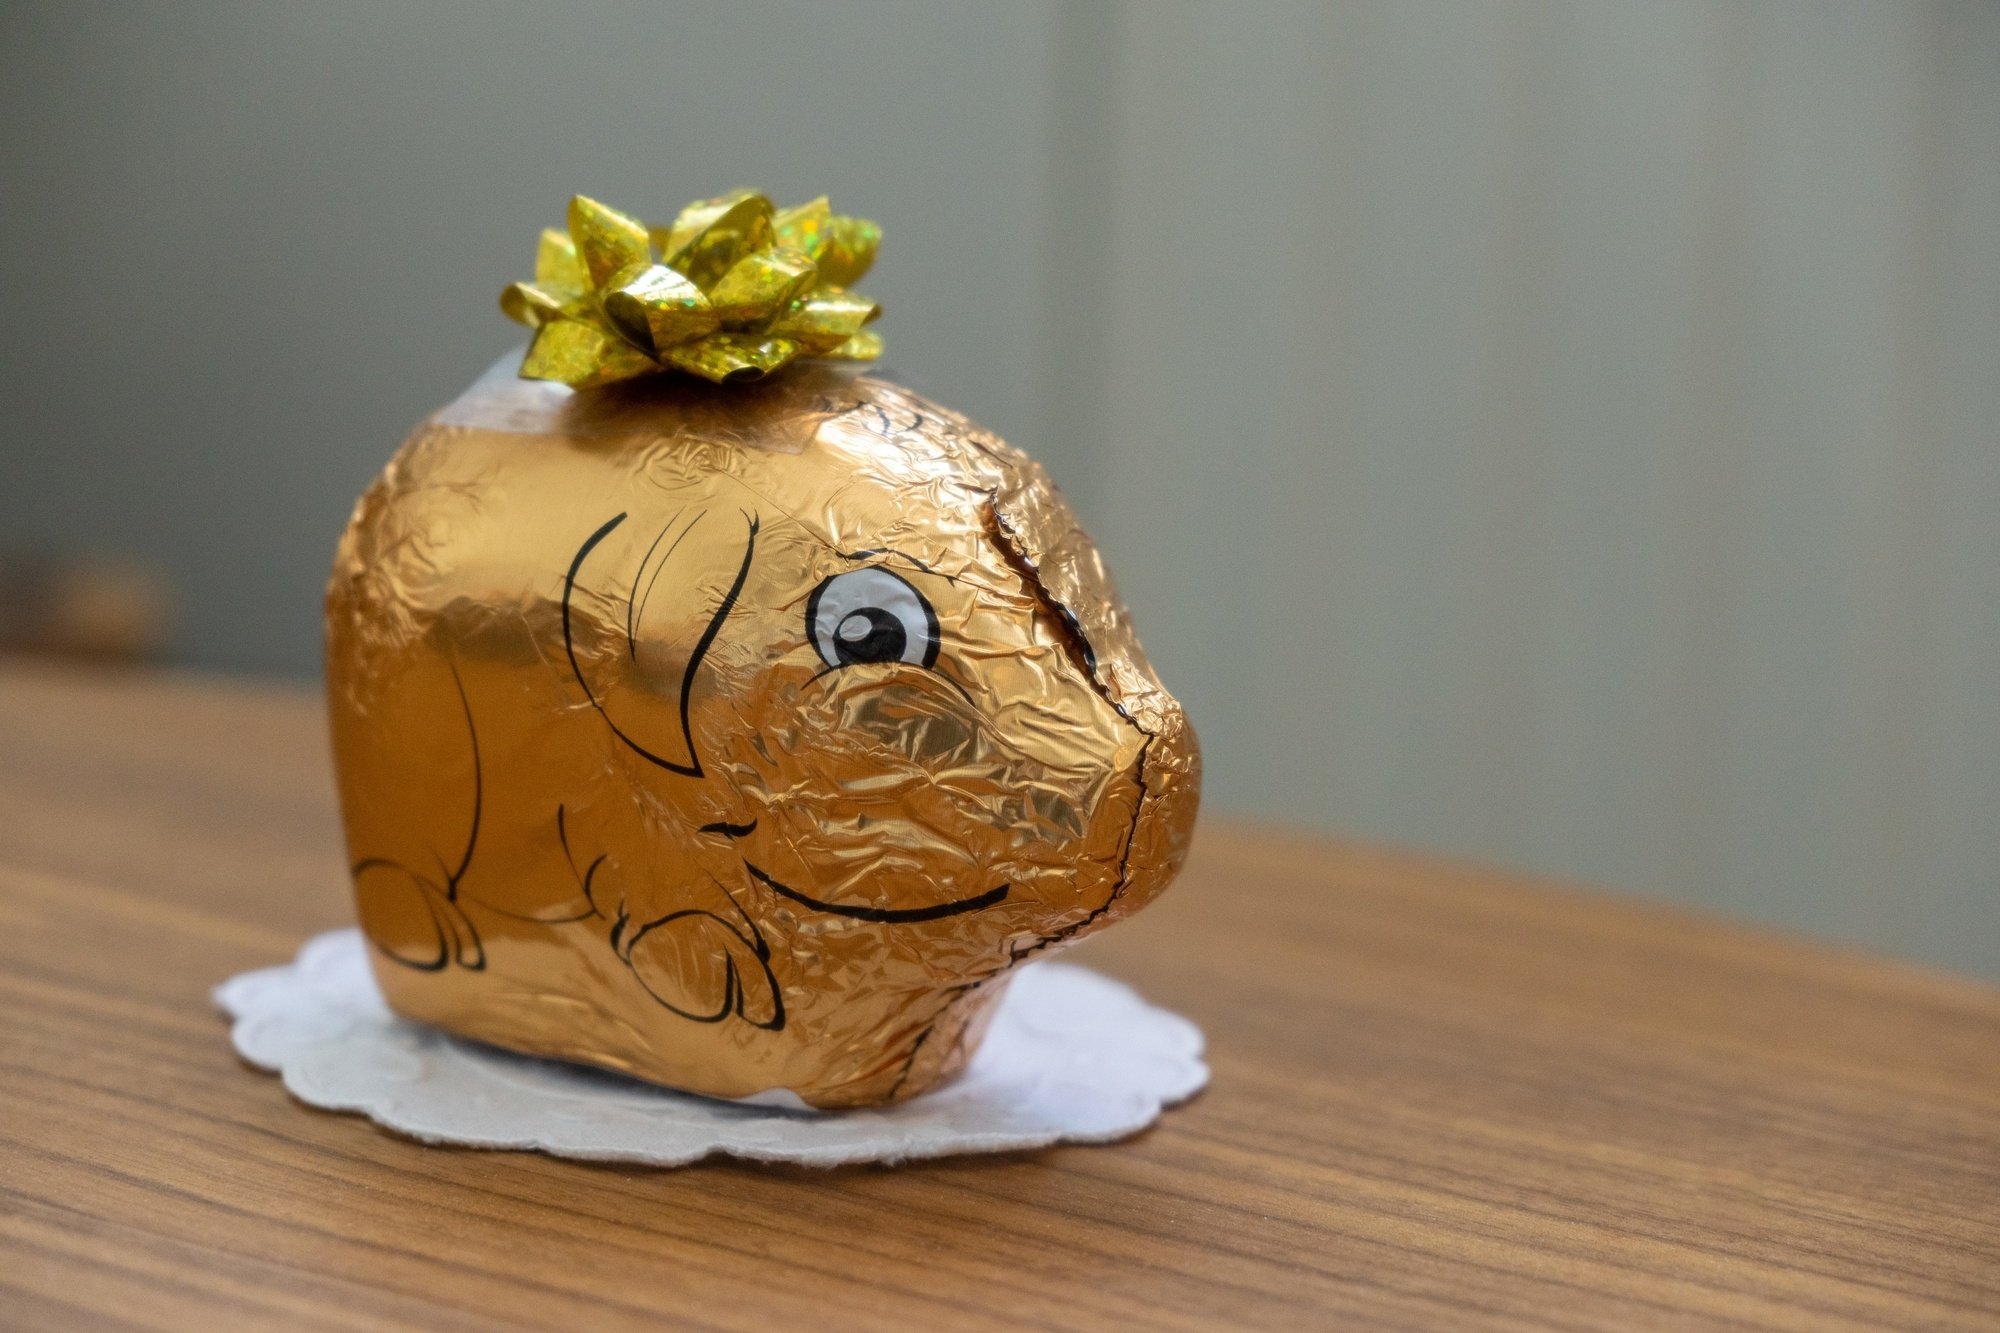 Look for golden pigs made of chocolate, Christmas traditions in the Czech Republic and Slovakia 